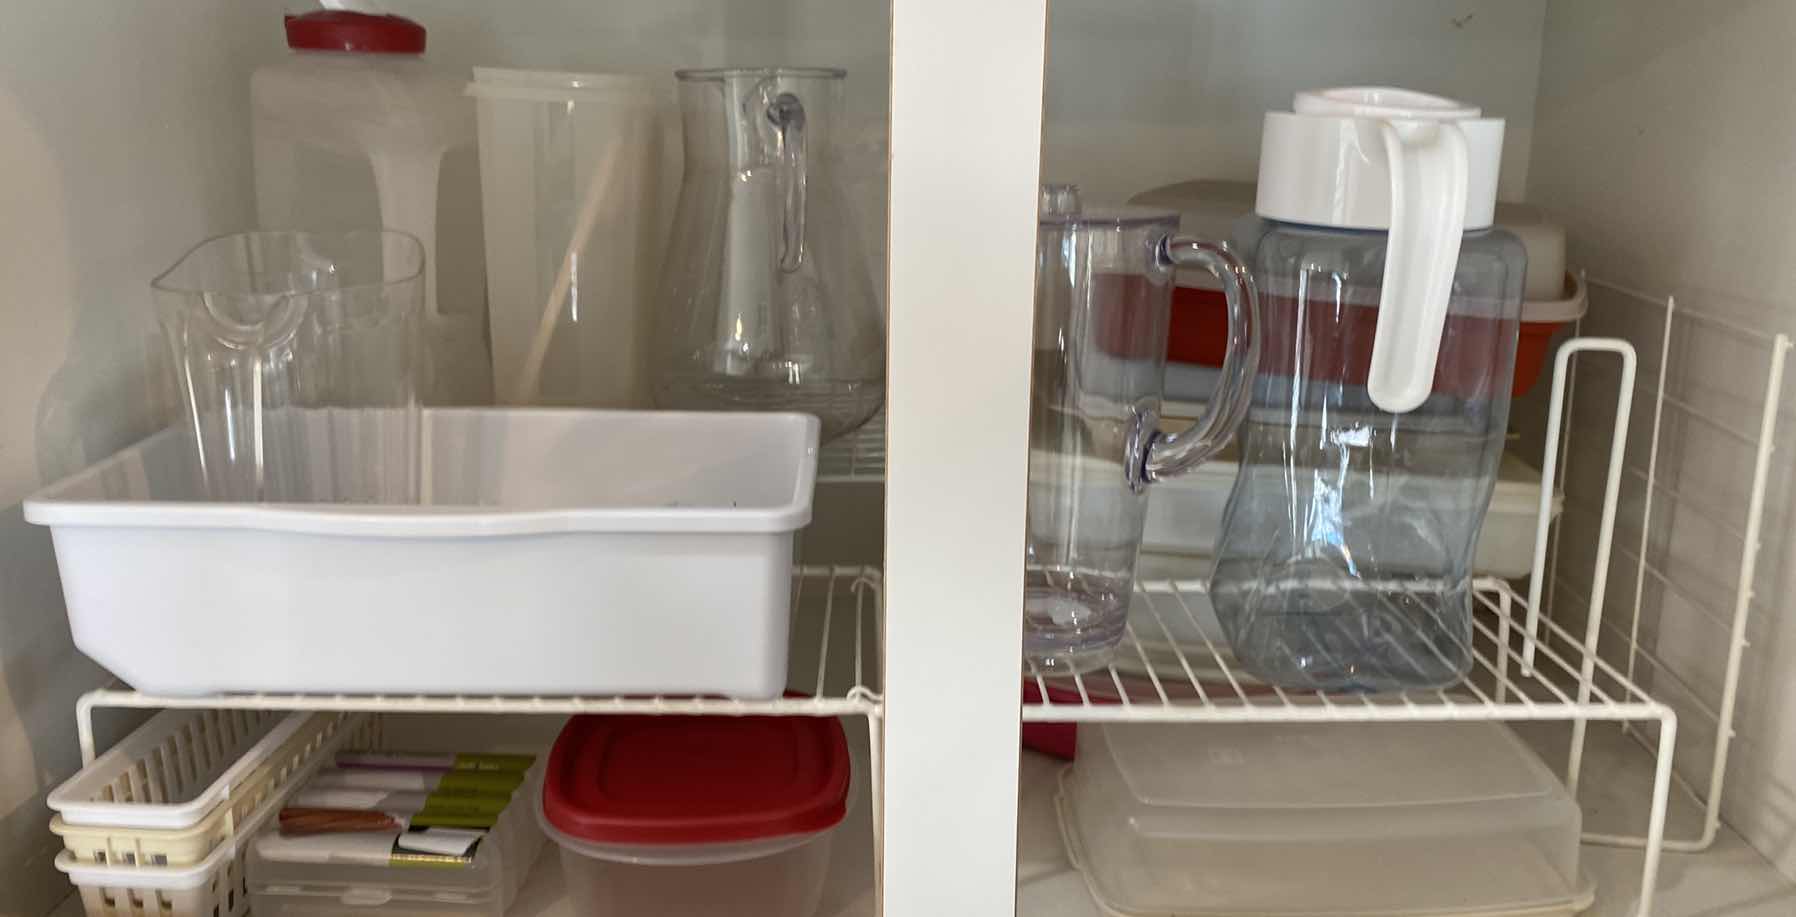 Photo 1 of CONTENTS OF KITCHEN CABINET ABOVE FRIDGE - PLASTIC PITCHERS STORAGE AND SHELVING